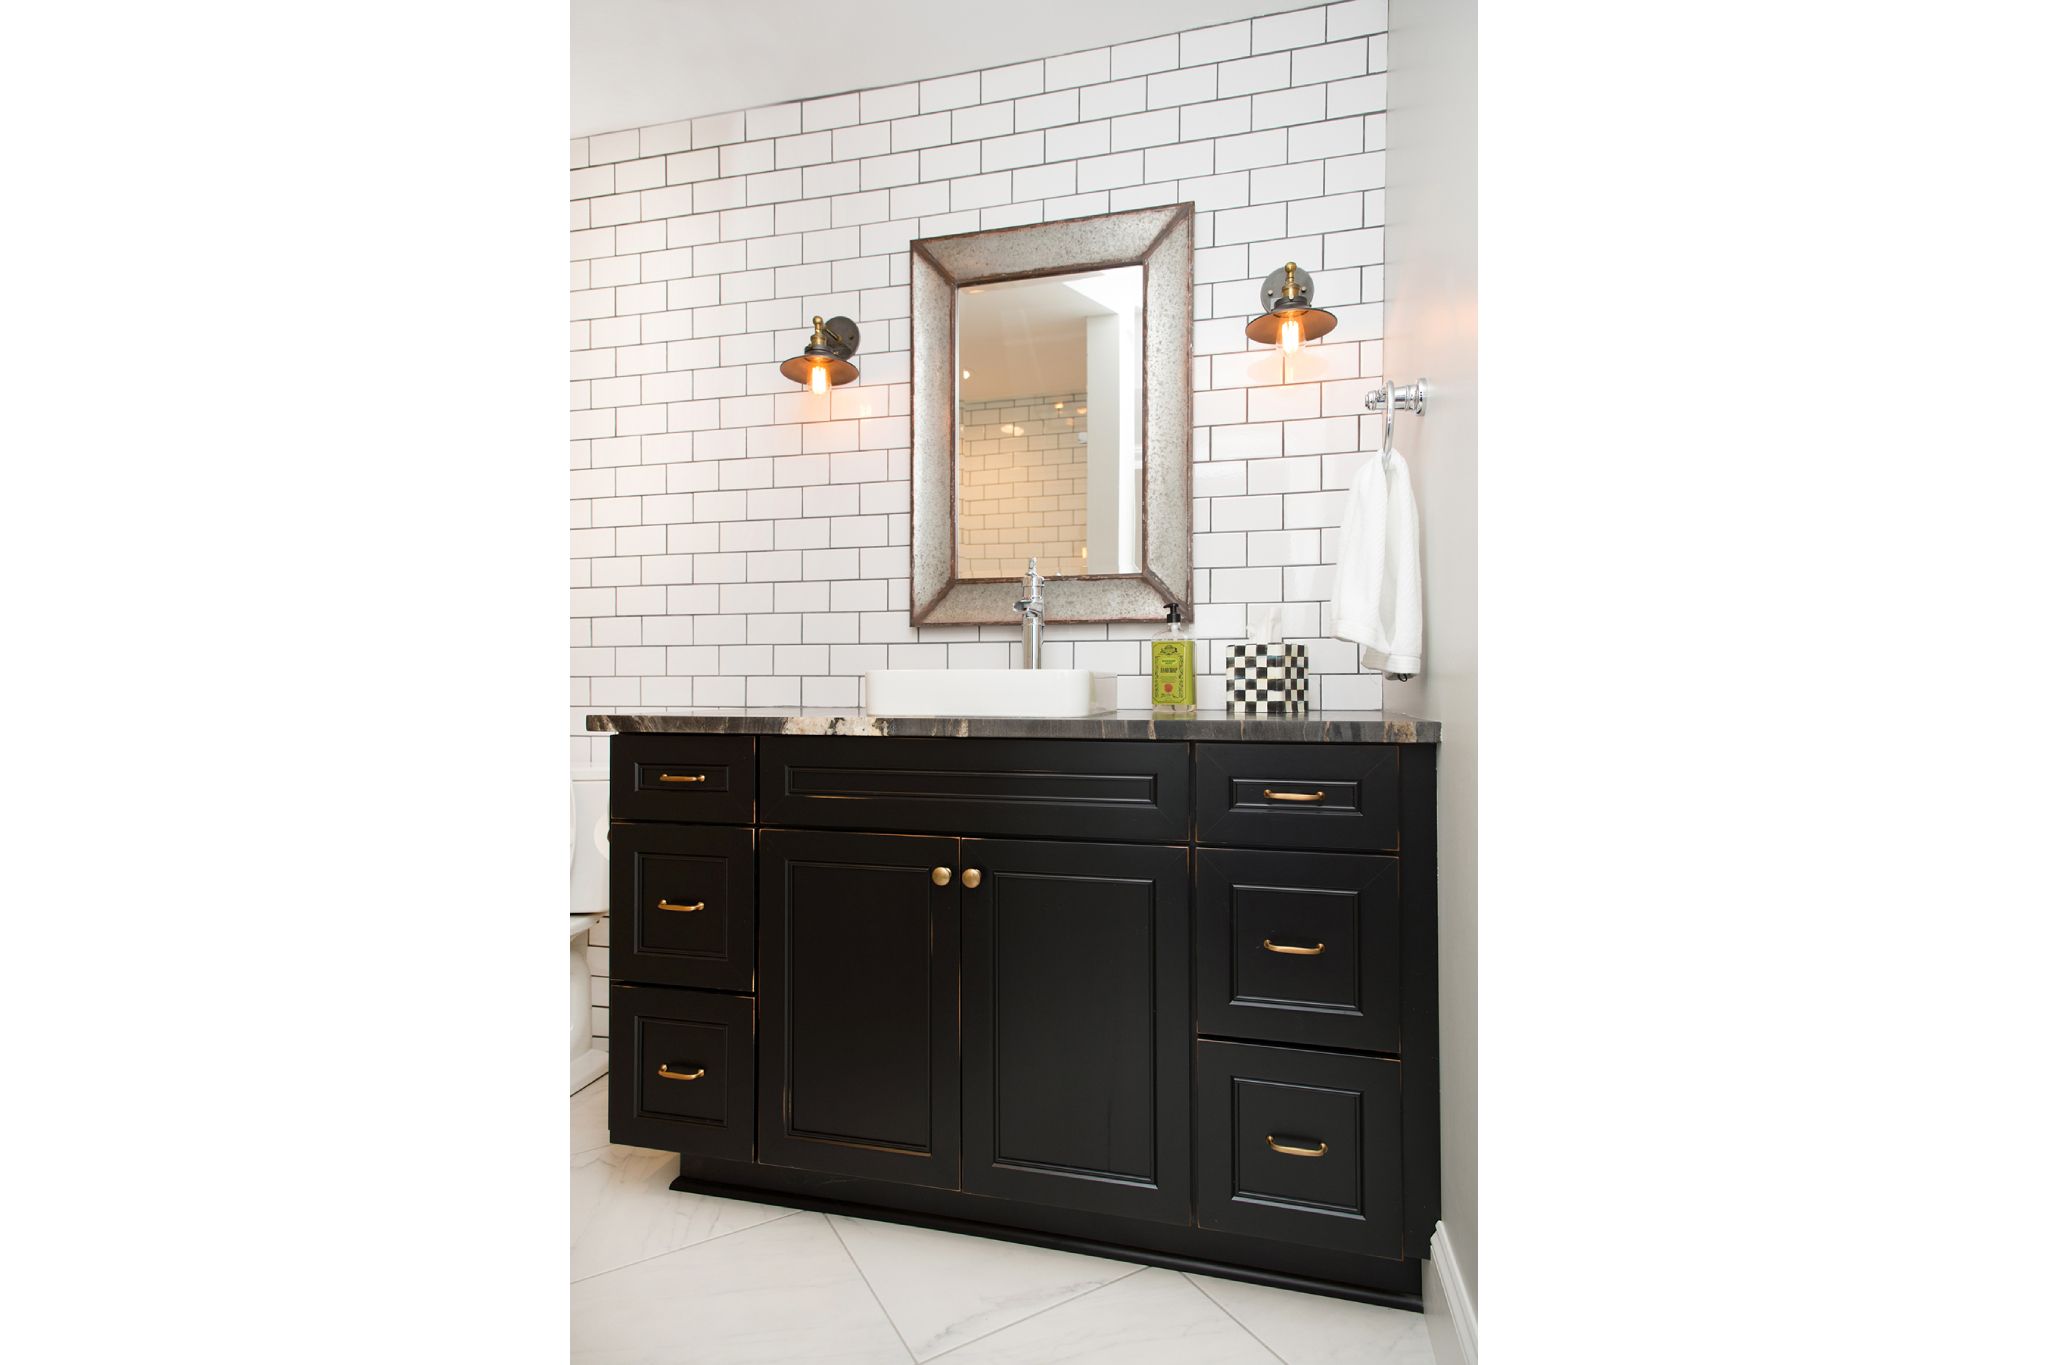 Bathroom with white subway-tiled walls and black grout, with a black and gold-accented statement vanity